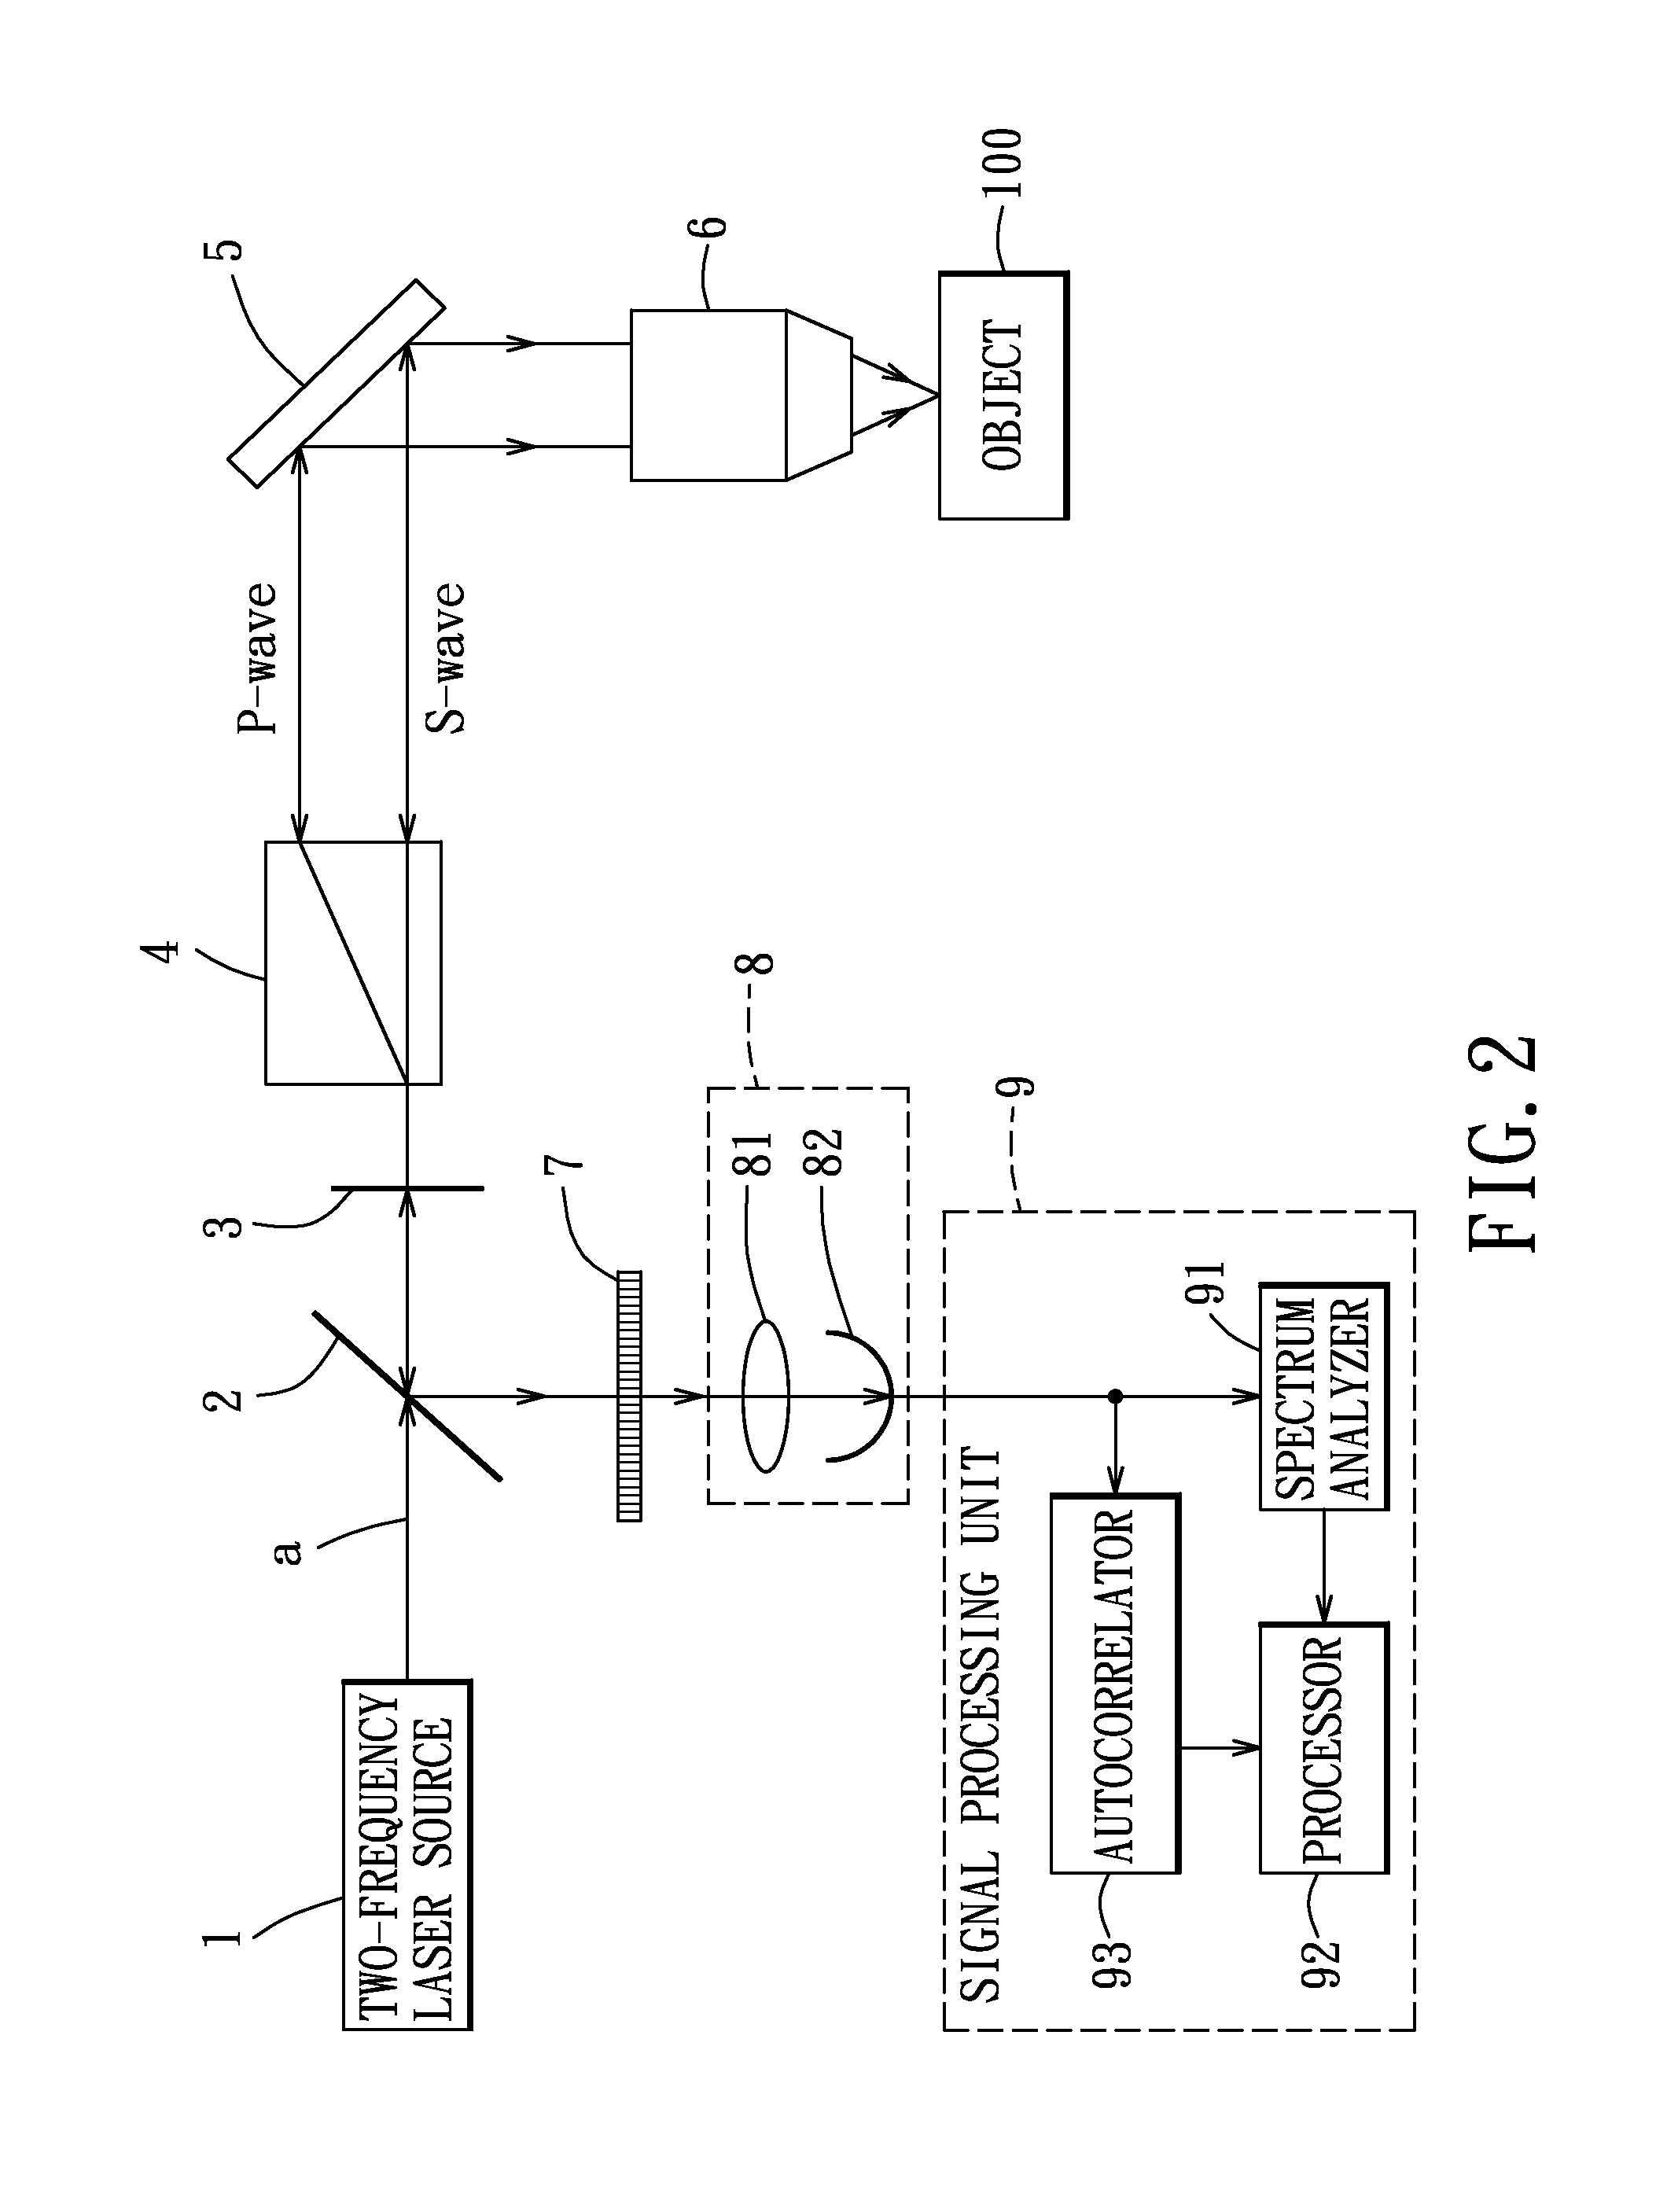 Localized dynamic light scattering system with doppler velocity measuring capability